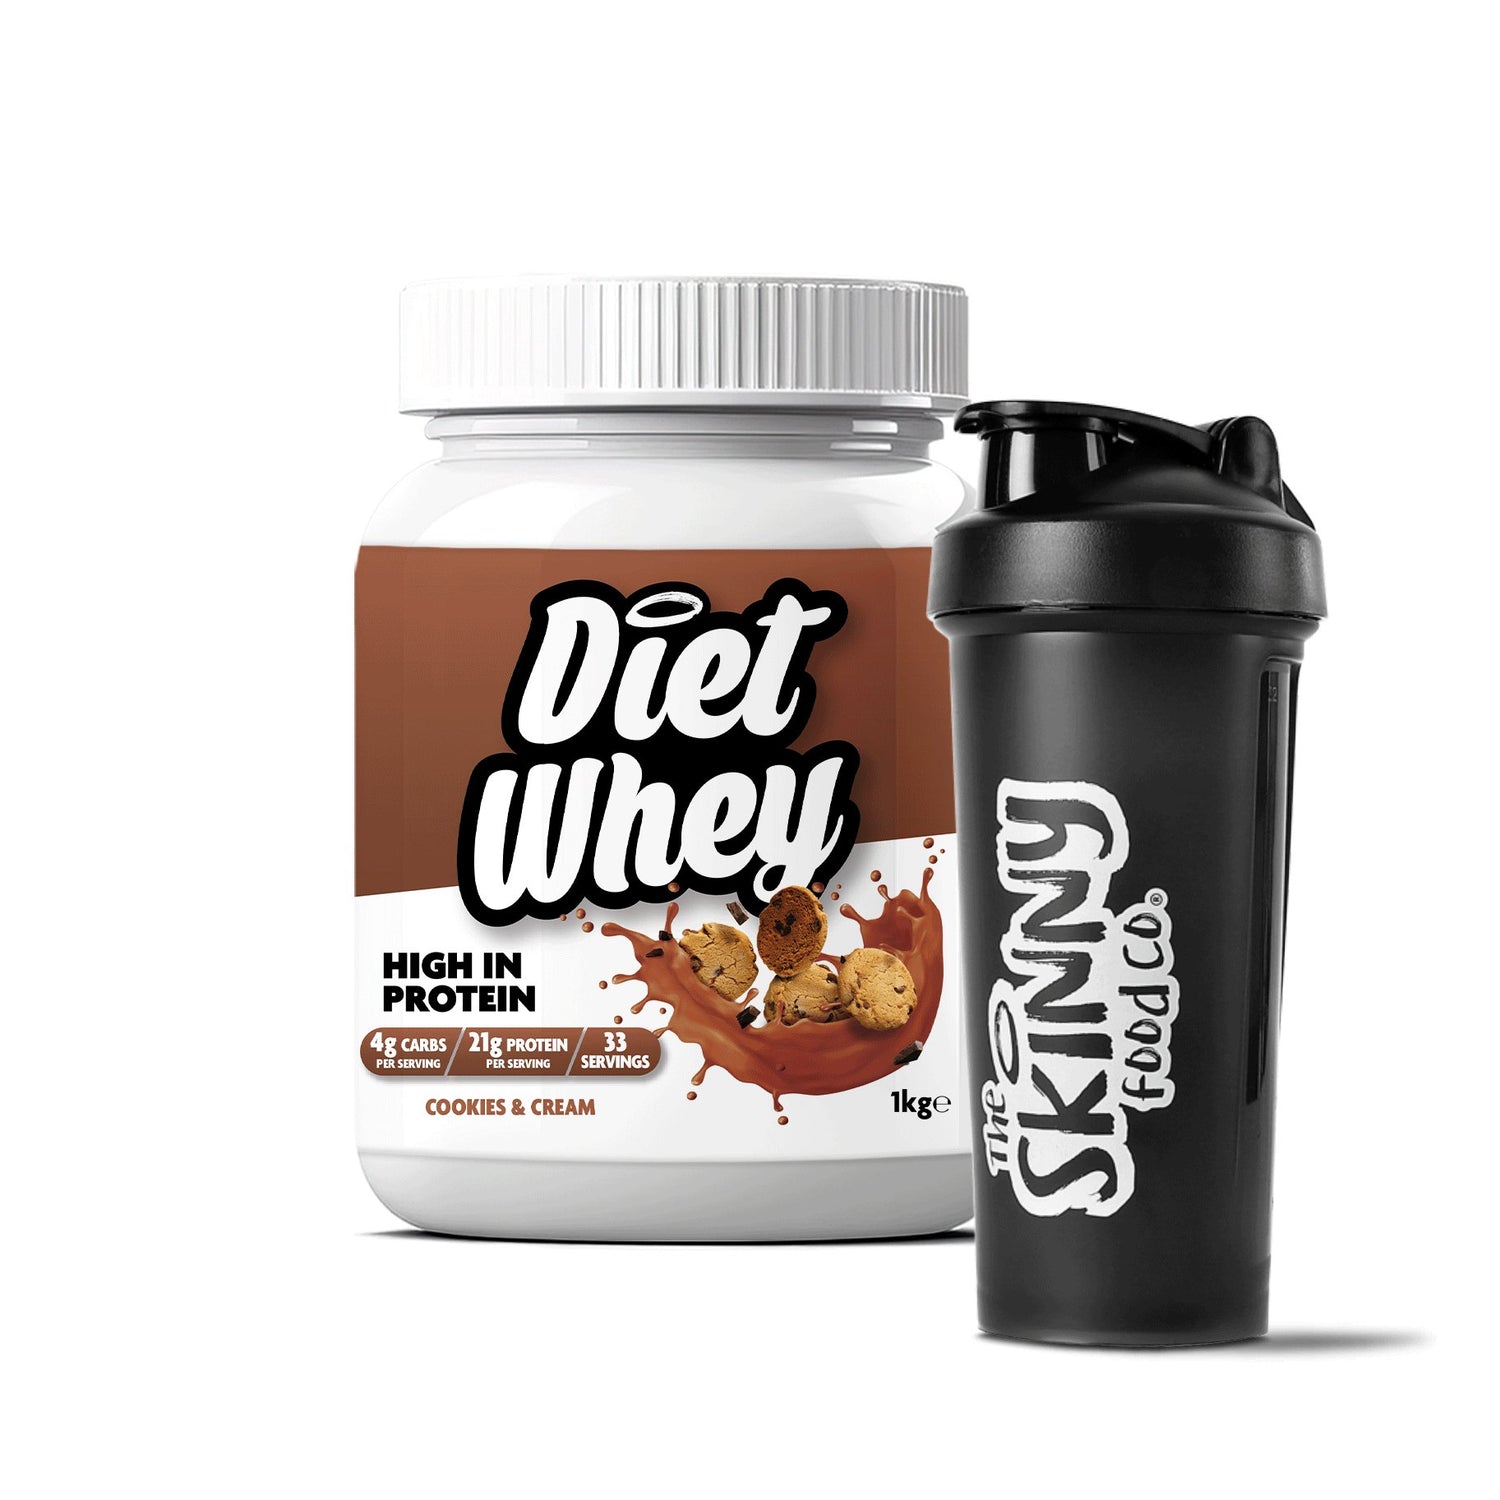 Diet Whey Protein + Free Shaker - Cookies & Cream 1kg - 21g protein per serving - theskinnyfoodco